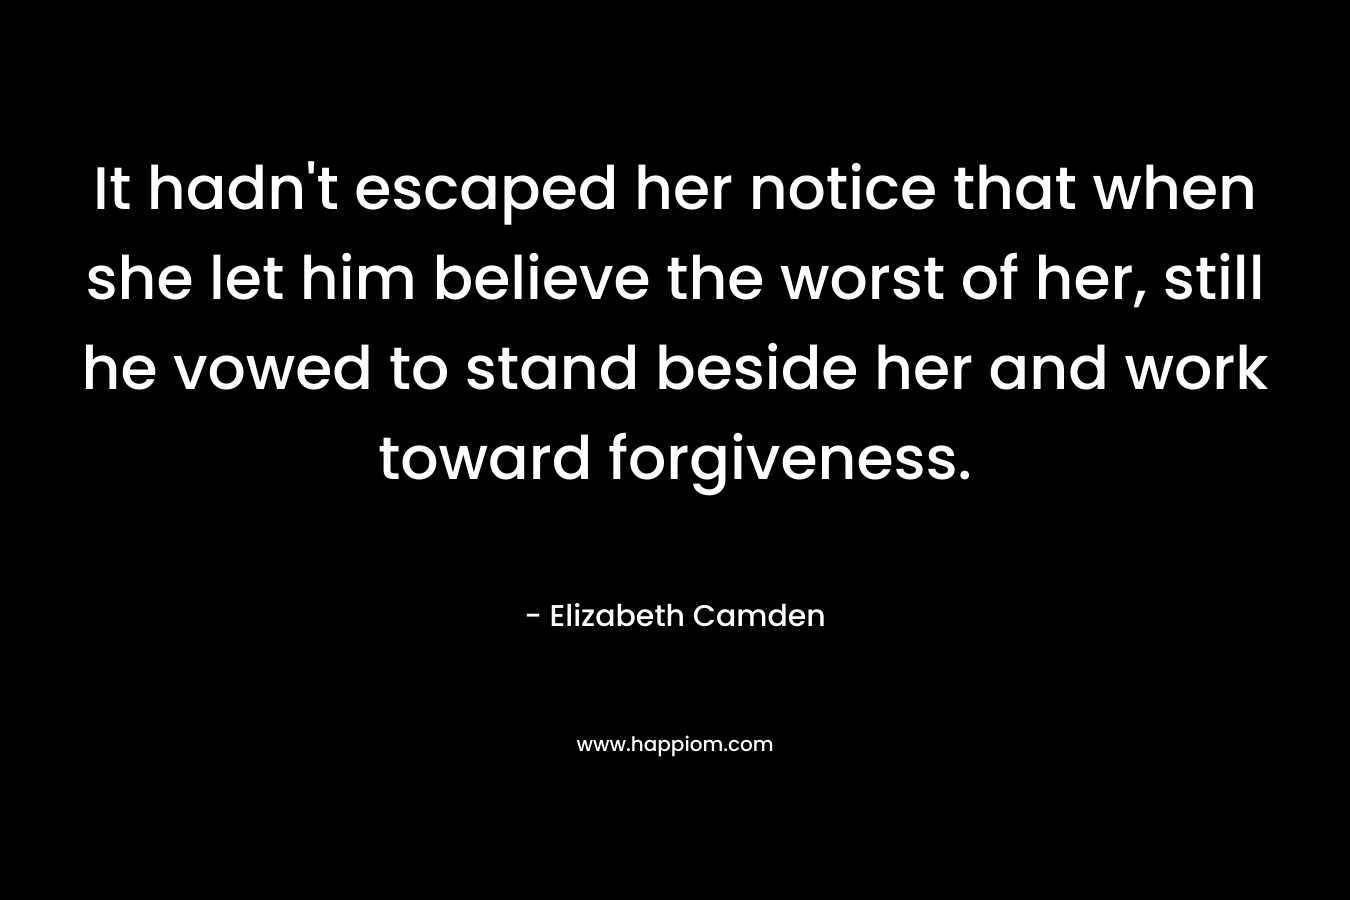 It hadn’t escaped her notice that when she let him believe the worst of her, still he vowed to stand beside her and work toward forgiveness. – Elizabeth Camden